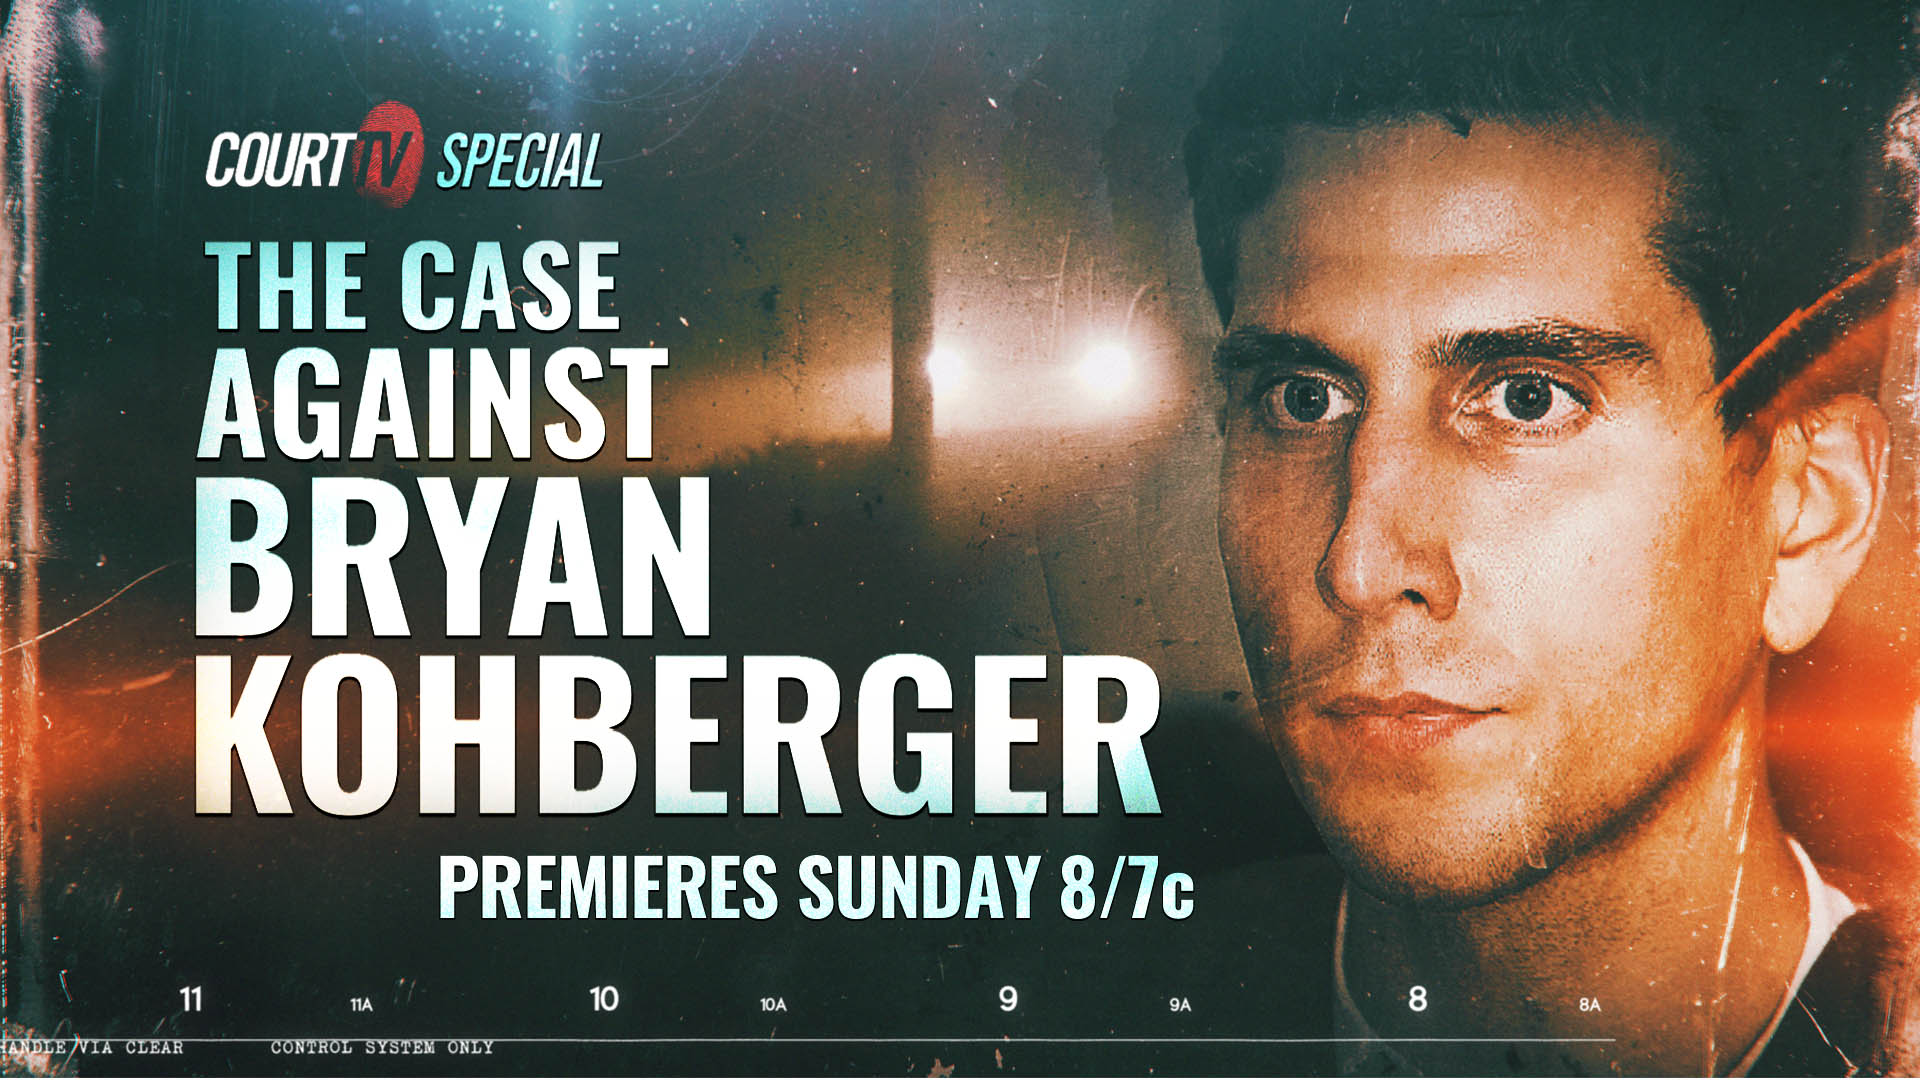 Court TV To Air Special on Bryan Kohberger Murder Case